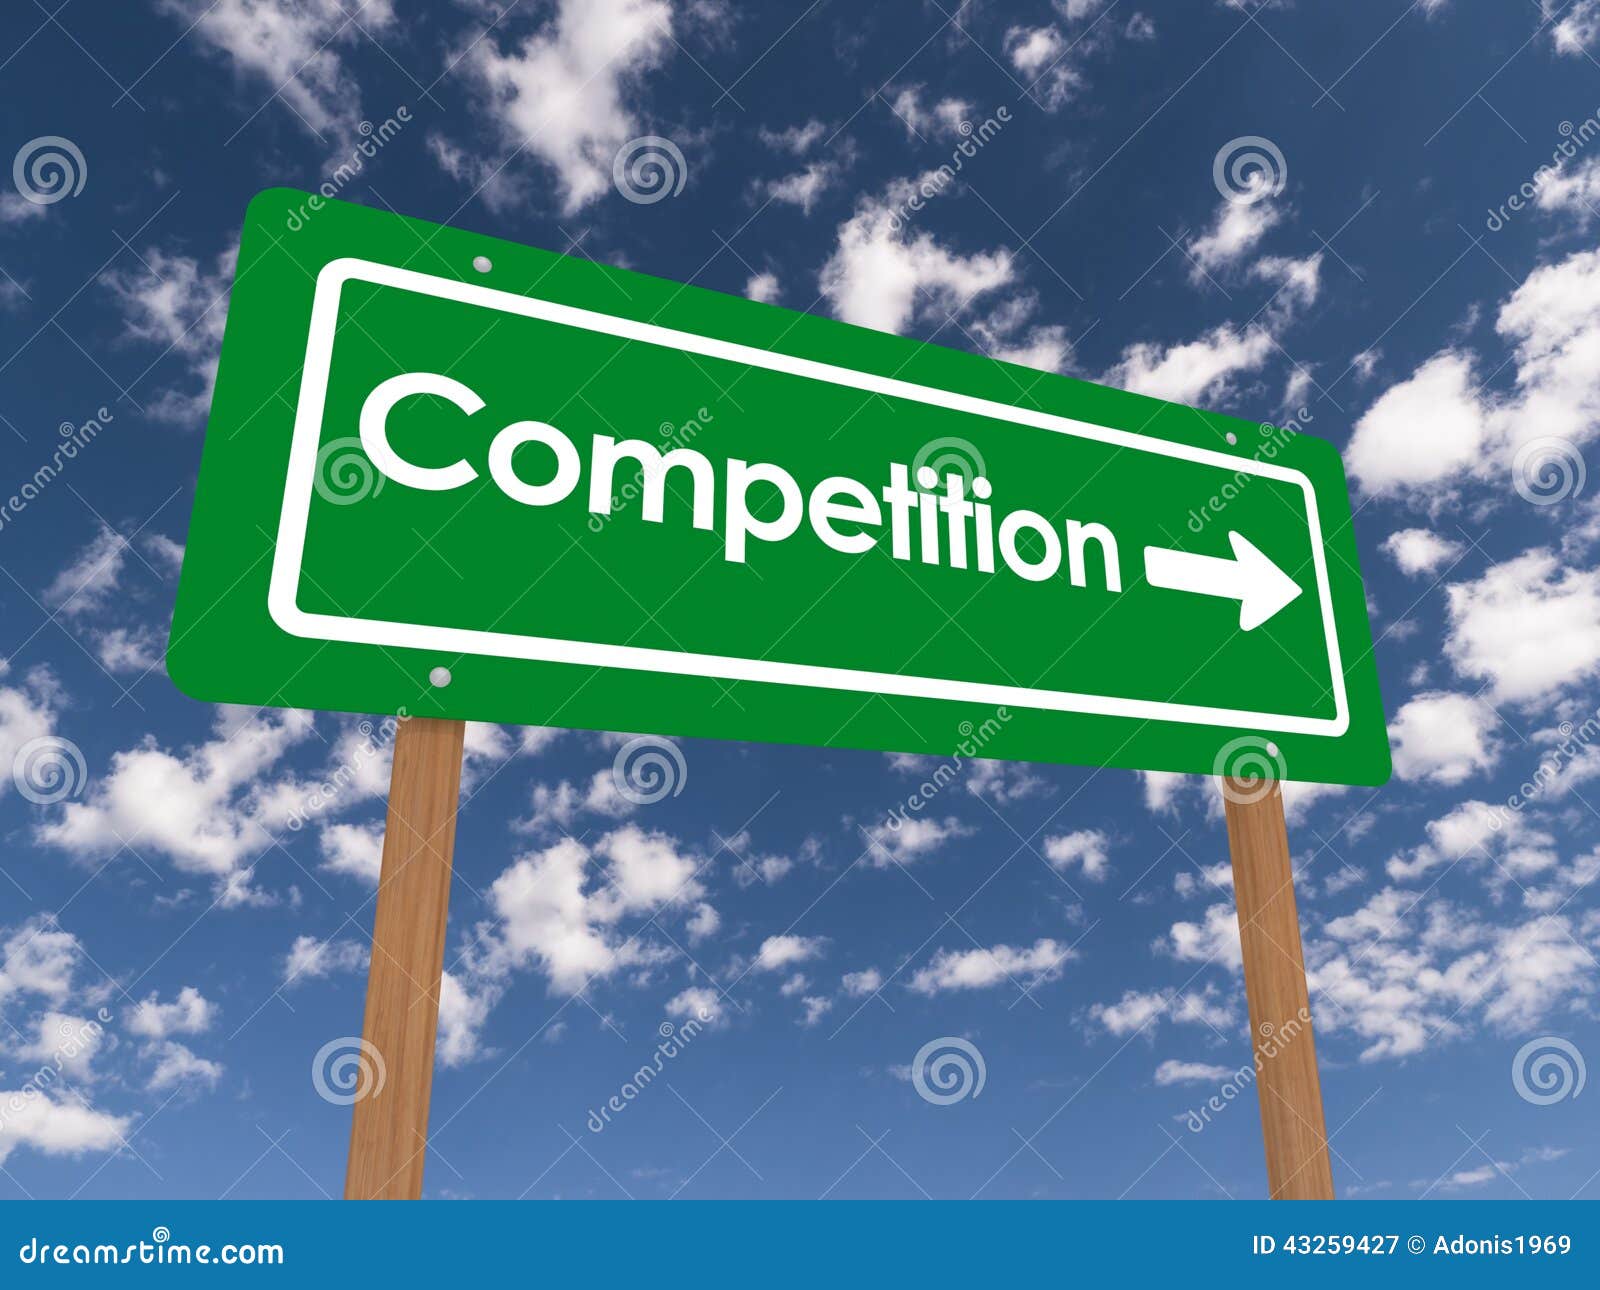 competition sign